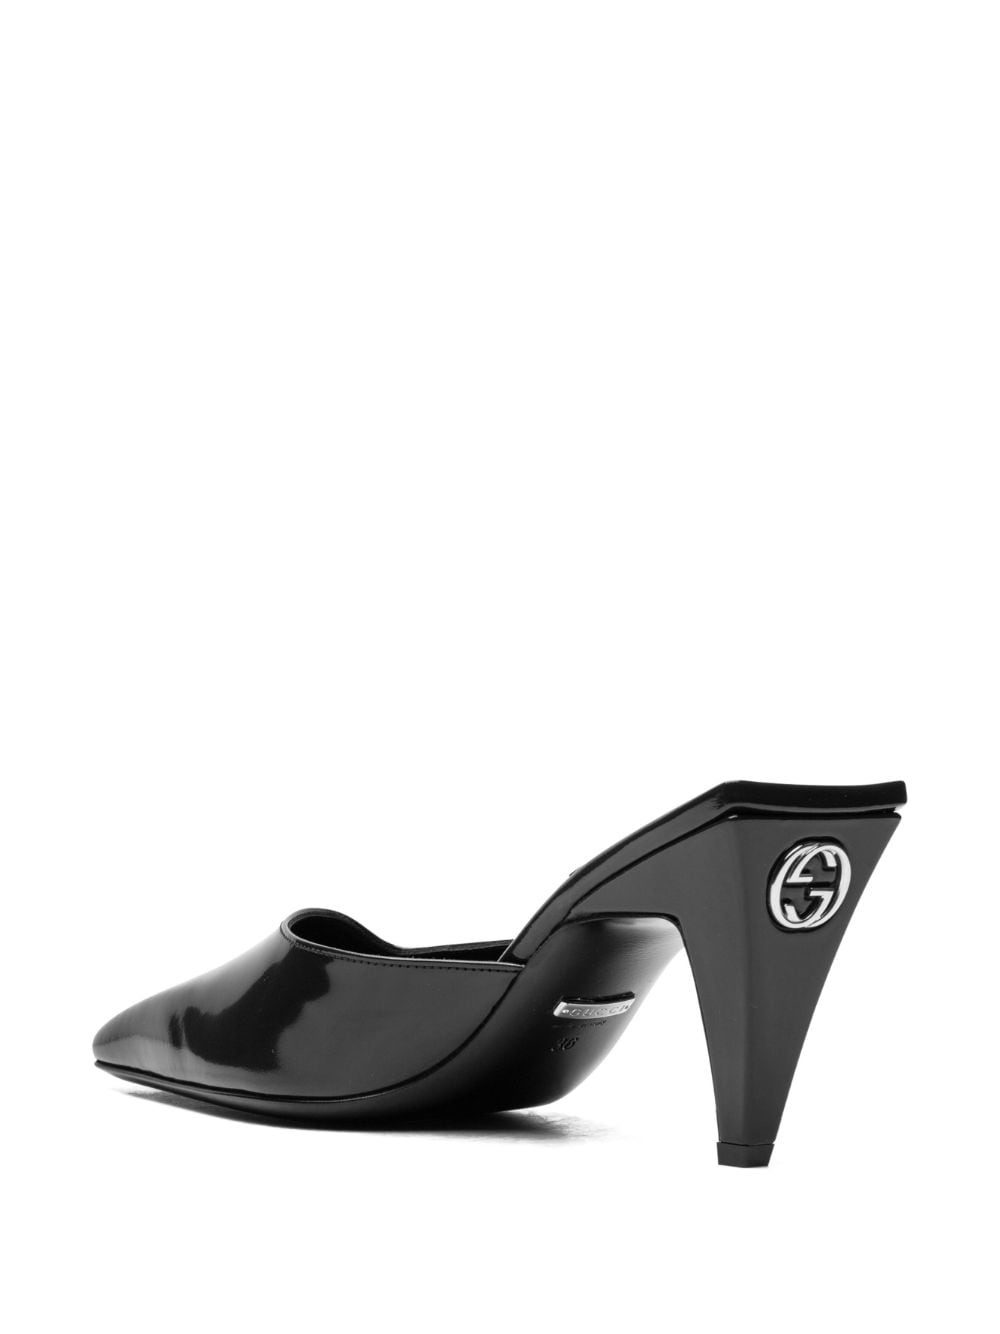 patent leather mules - 3